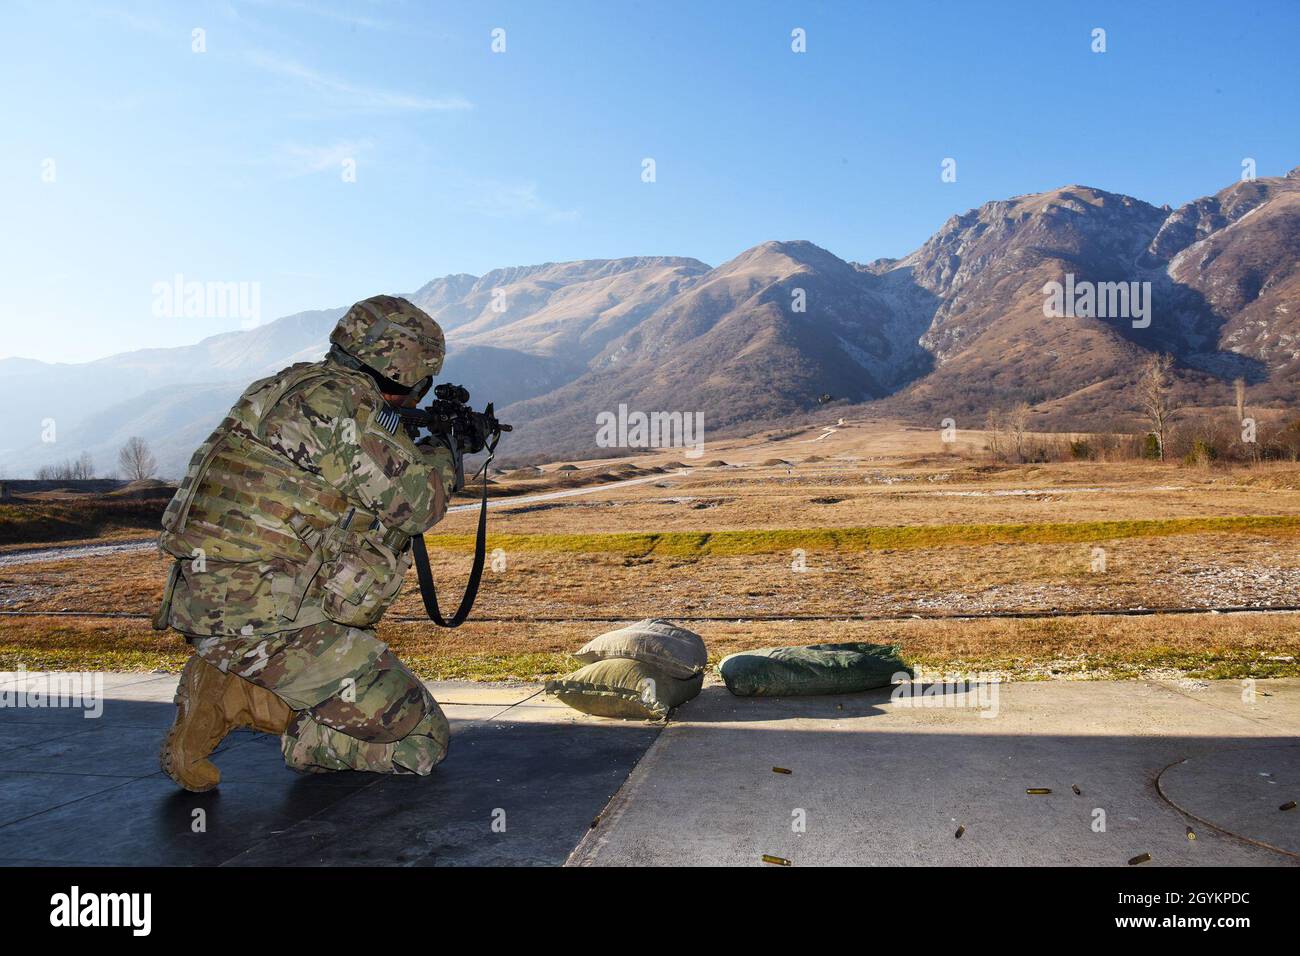 A U.S. Army Paratrooper assigned to the 173rd Airborne Brigade engages targets with an M4 carbine in kneeling position during weapons qualification at Cao Malnisio Range, Pordenone, Italy, Jan. 22, 2020. The 173rd Airborne Brigade is the U.S. Army Contingency Response Force in Europe, capable of projecting ready forces anywhere in the U.S. European, Africa or Central Commands' areas of responsibility. (U.S. Army photo by Paolo Bovo) Stock Photo